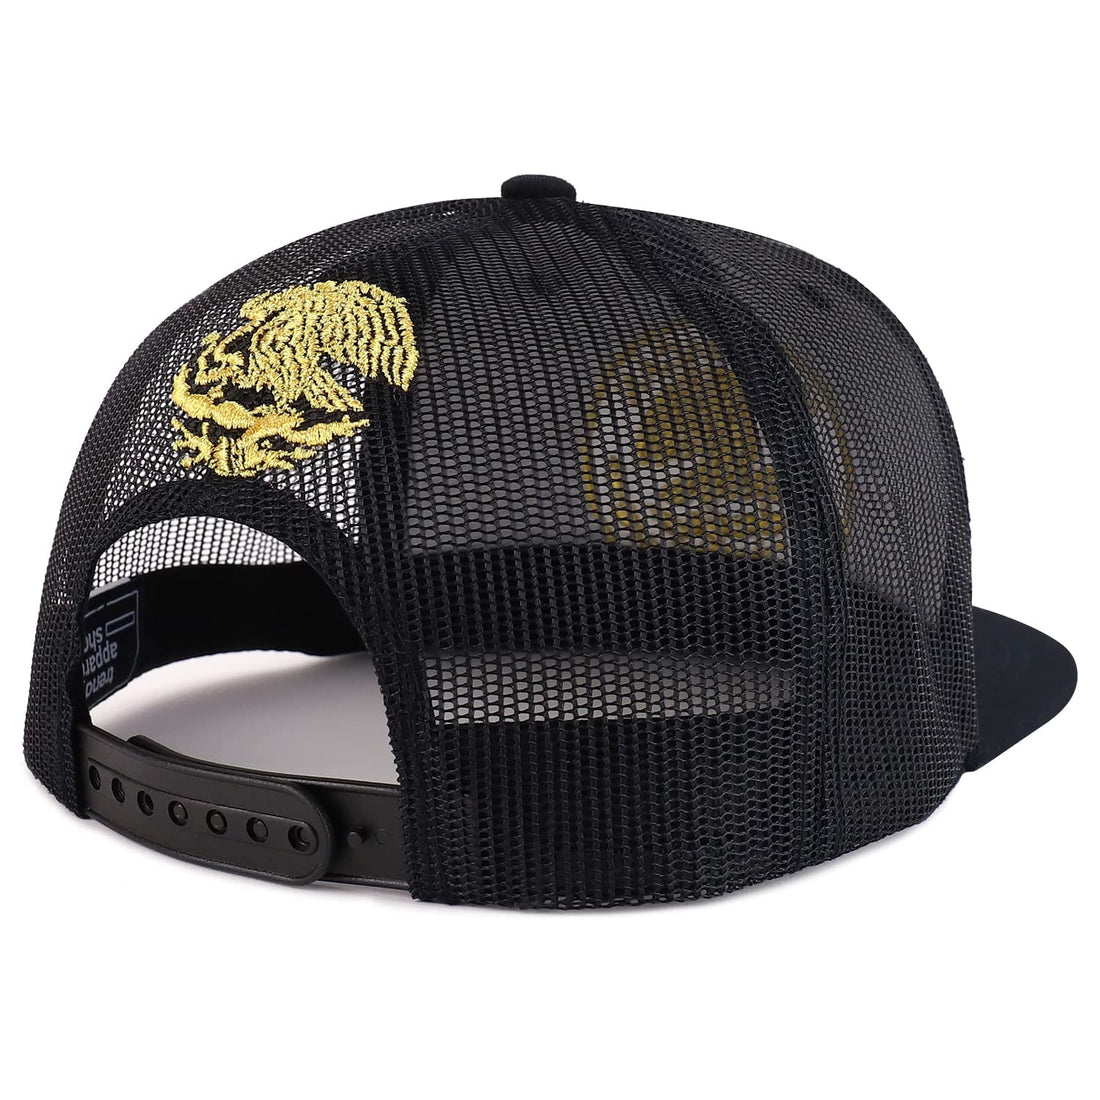 Trendy Apparel Shop Oversized XXL City of Mexico Eagle Embroidered Flat Bill Trucker Mesh Cap